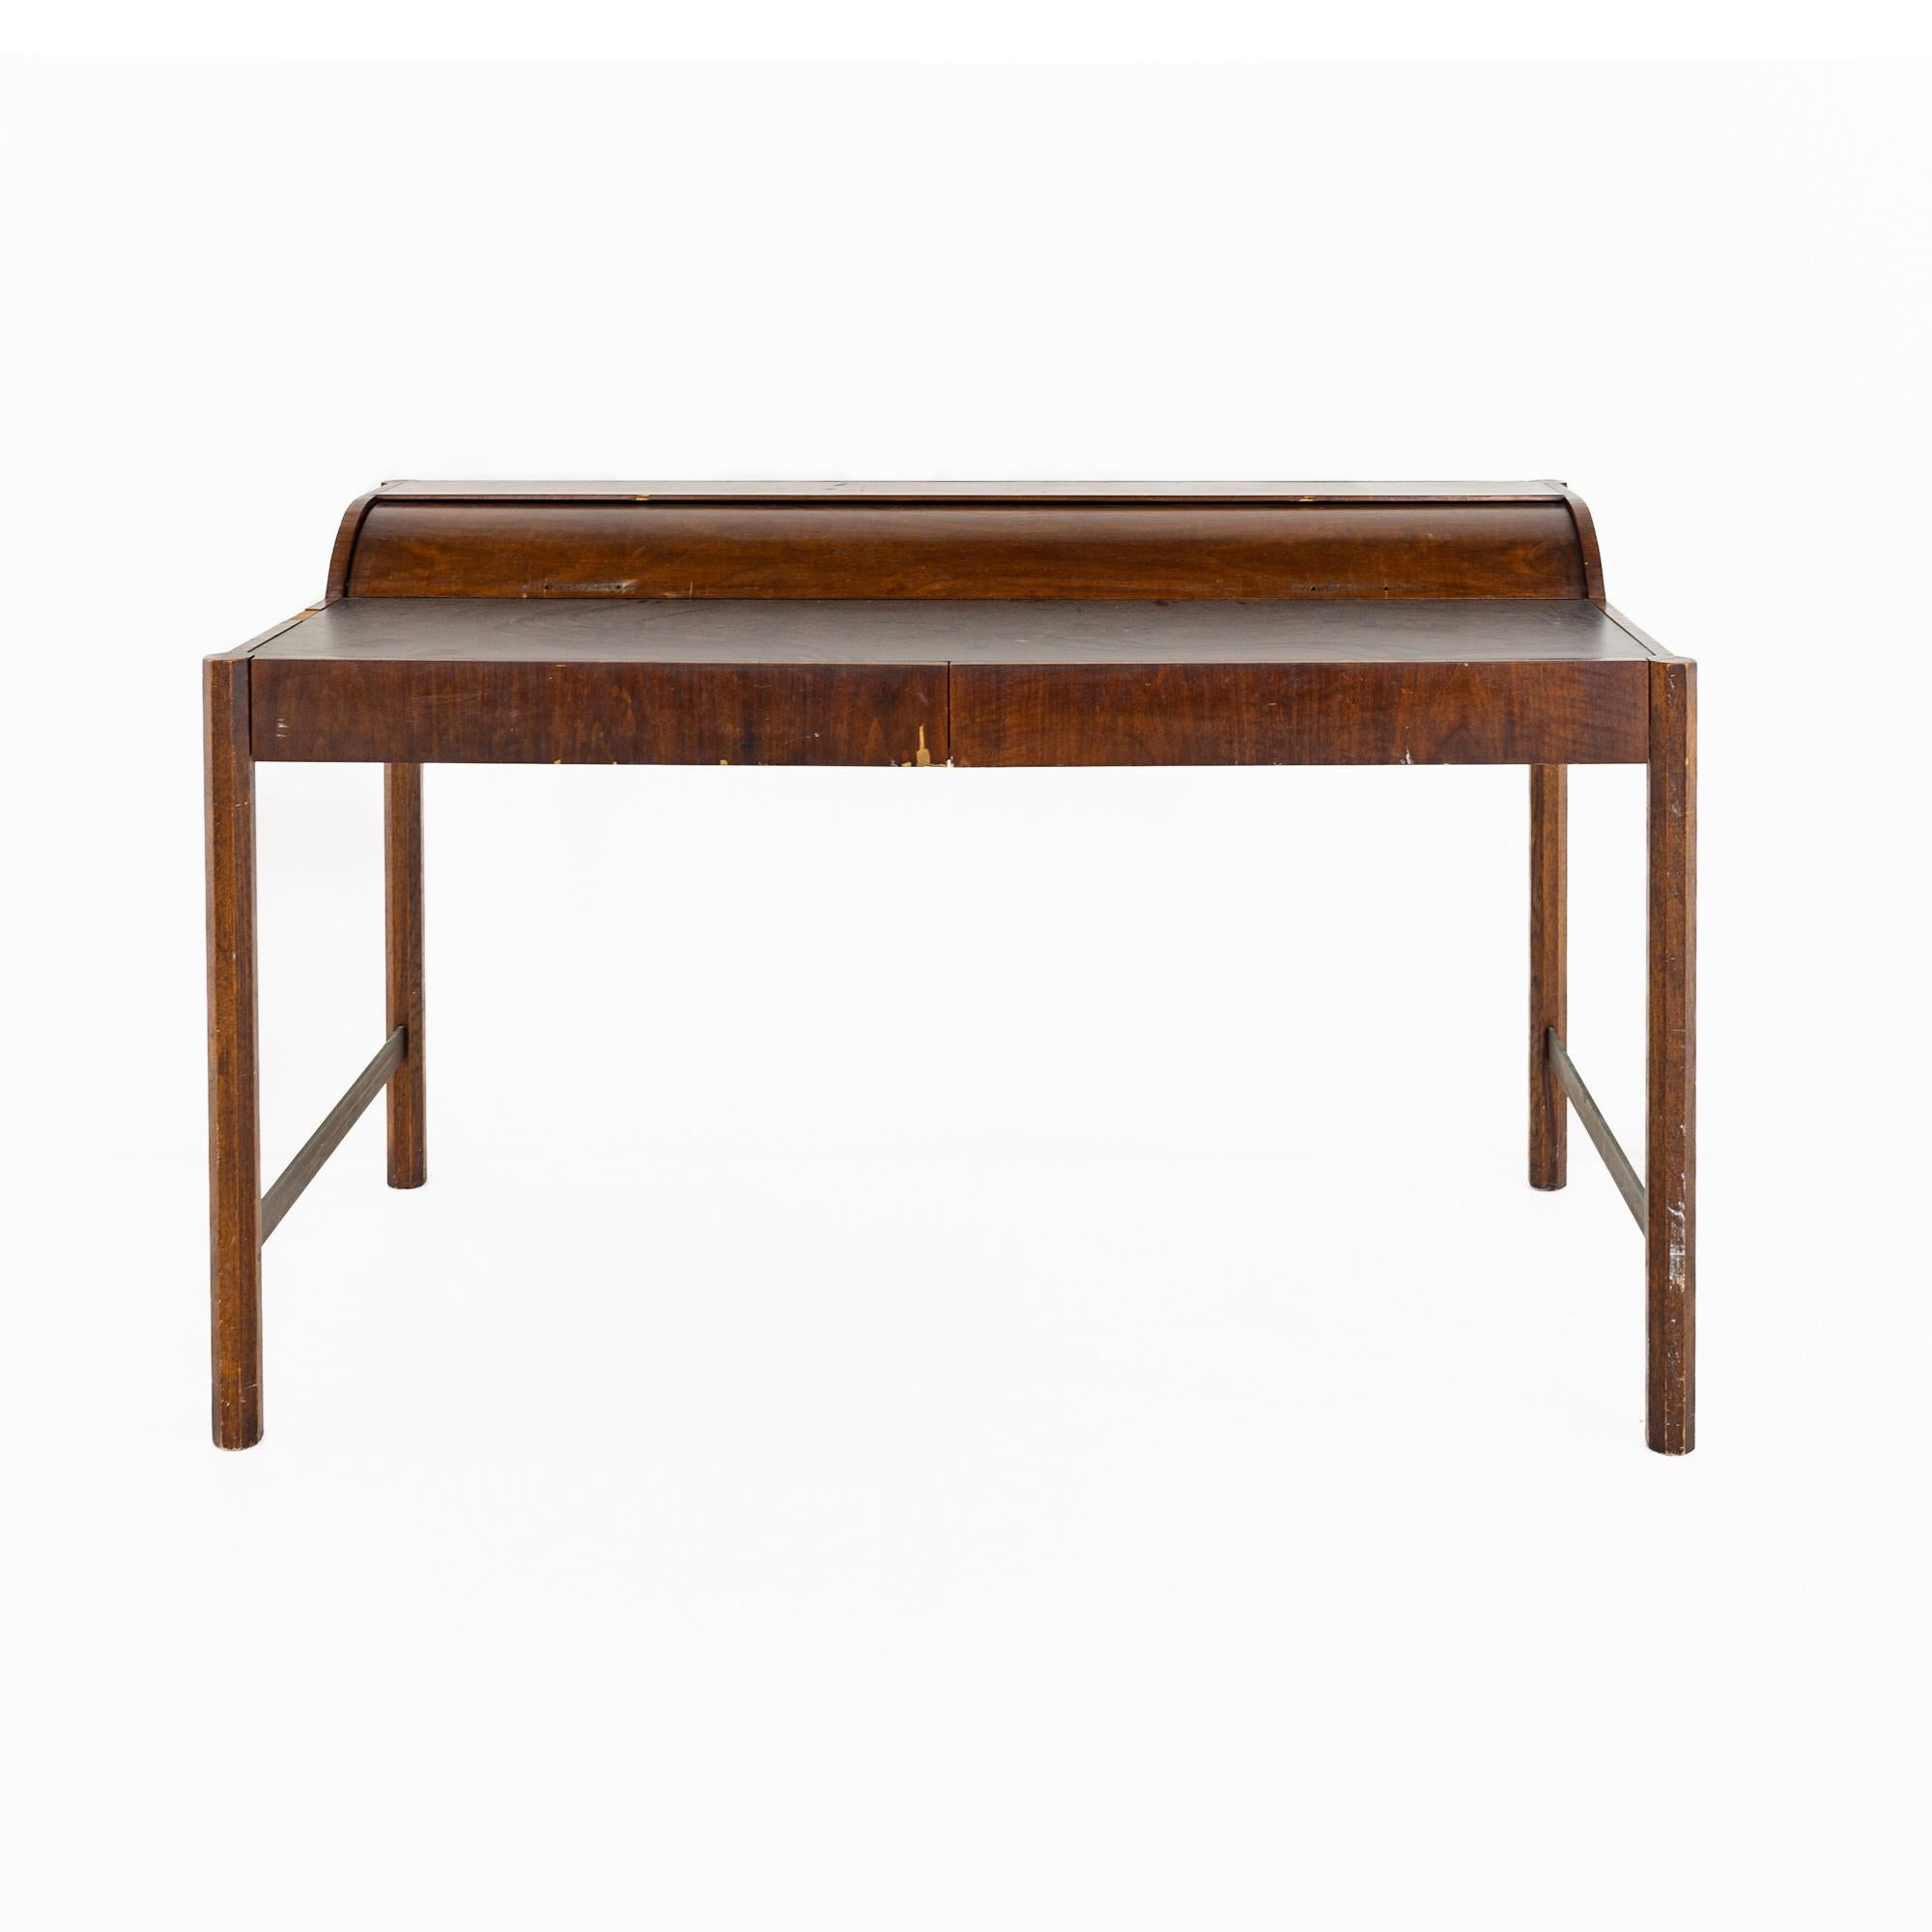 Hekman Furniture mid century desk with cylinder roll

The desk measures: 53 wide x 28 deep x 33 inches high

All pieces of furniture can be had in what we call restored vintage condition. That means the piece is restored upon purchase so it’s